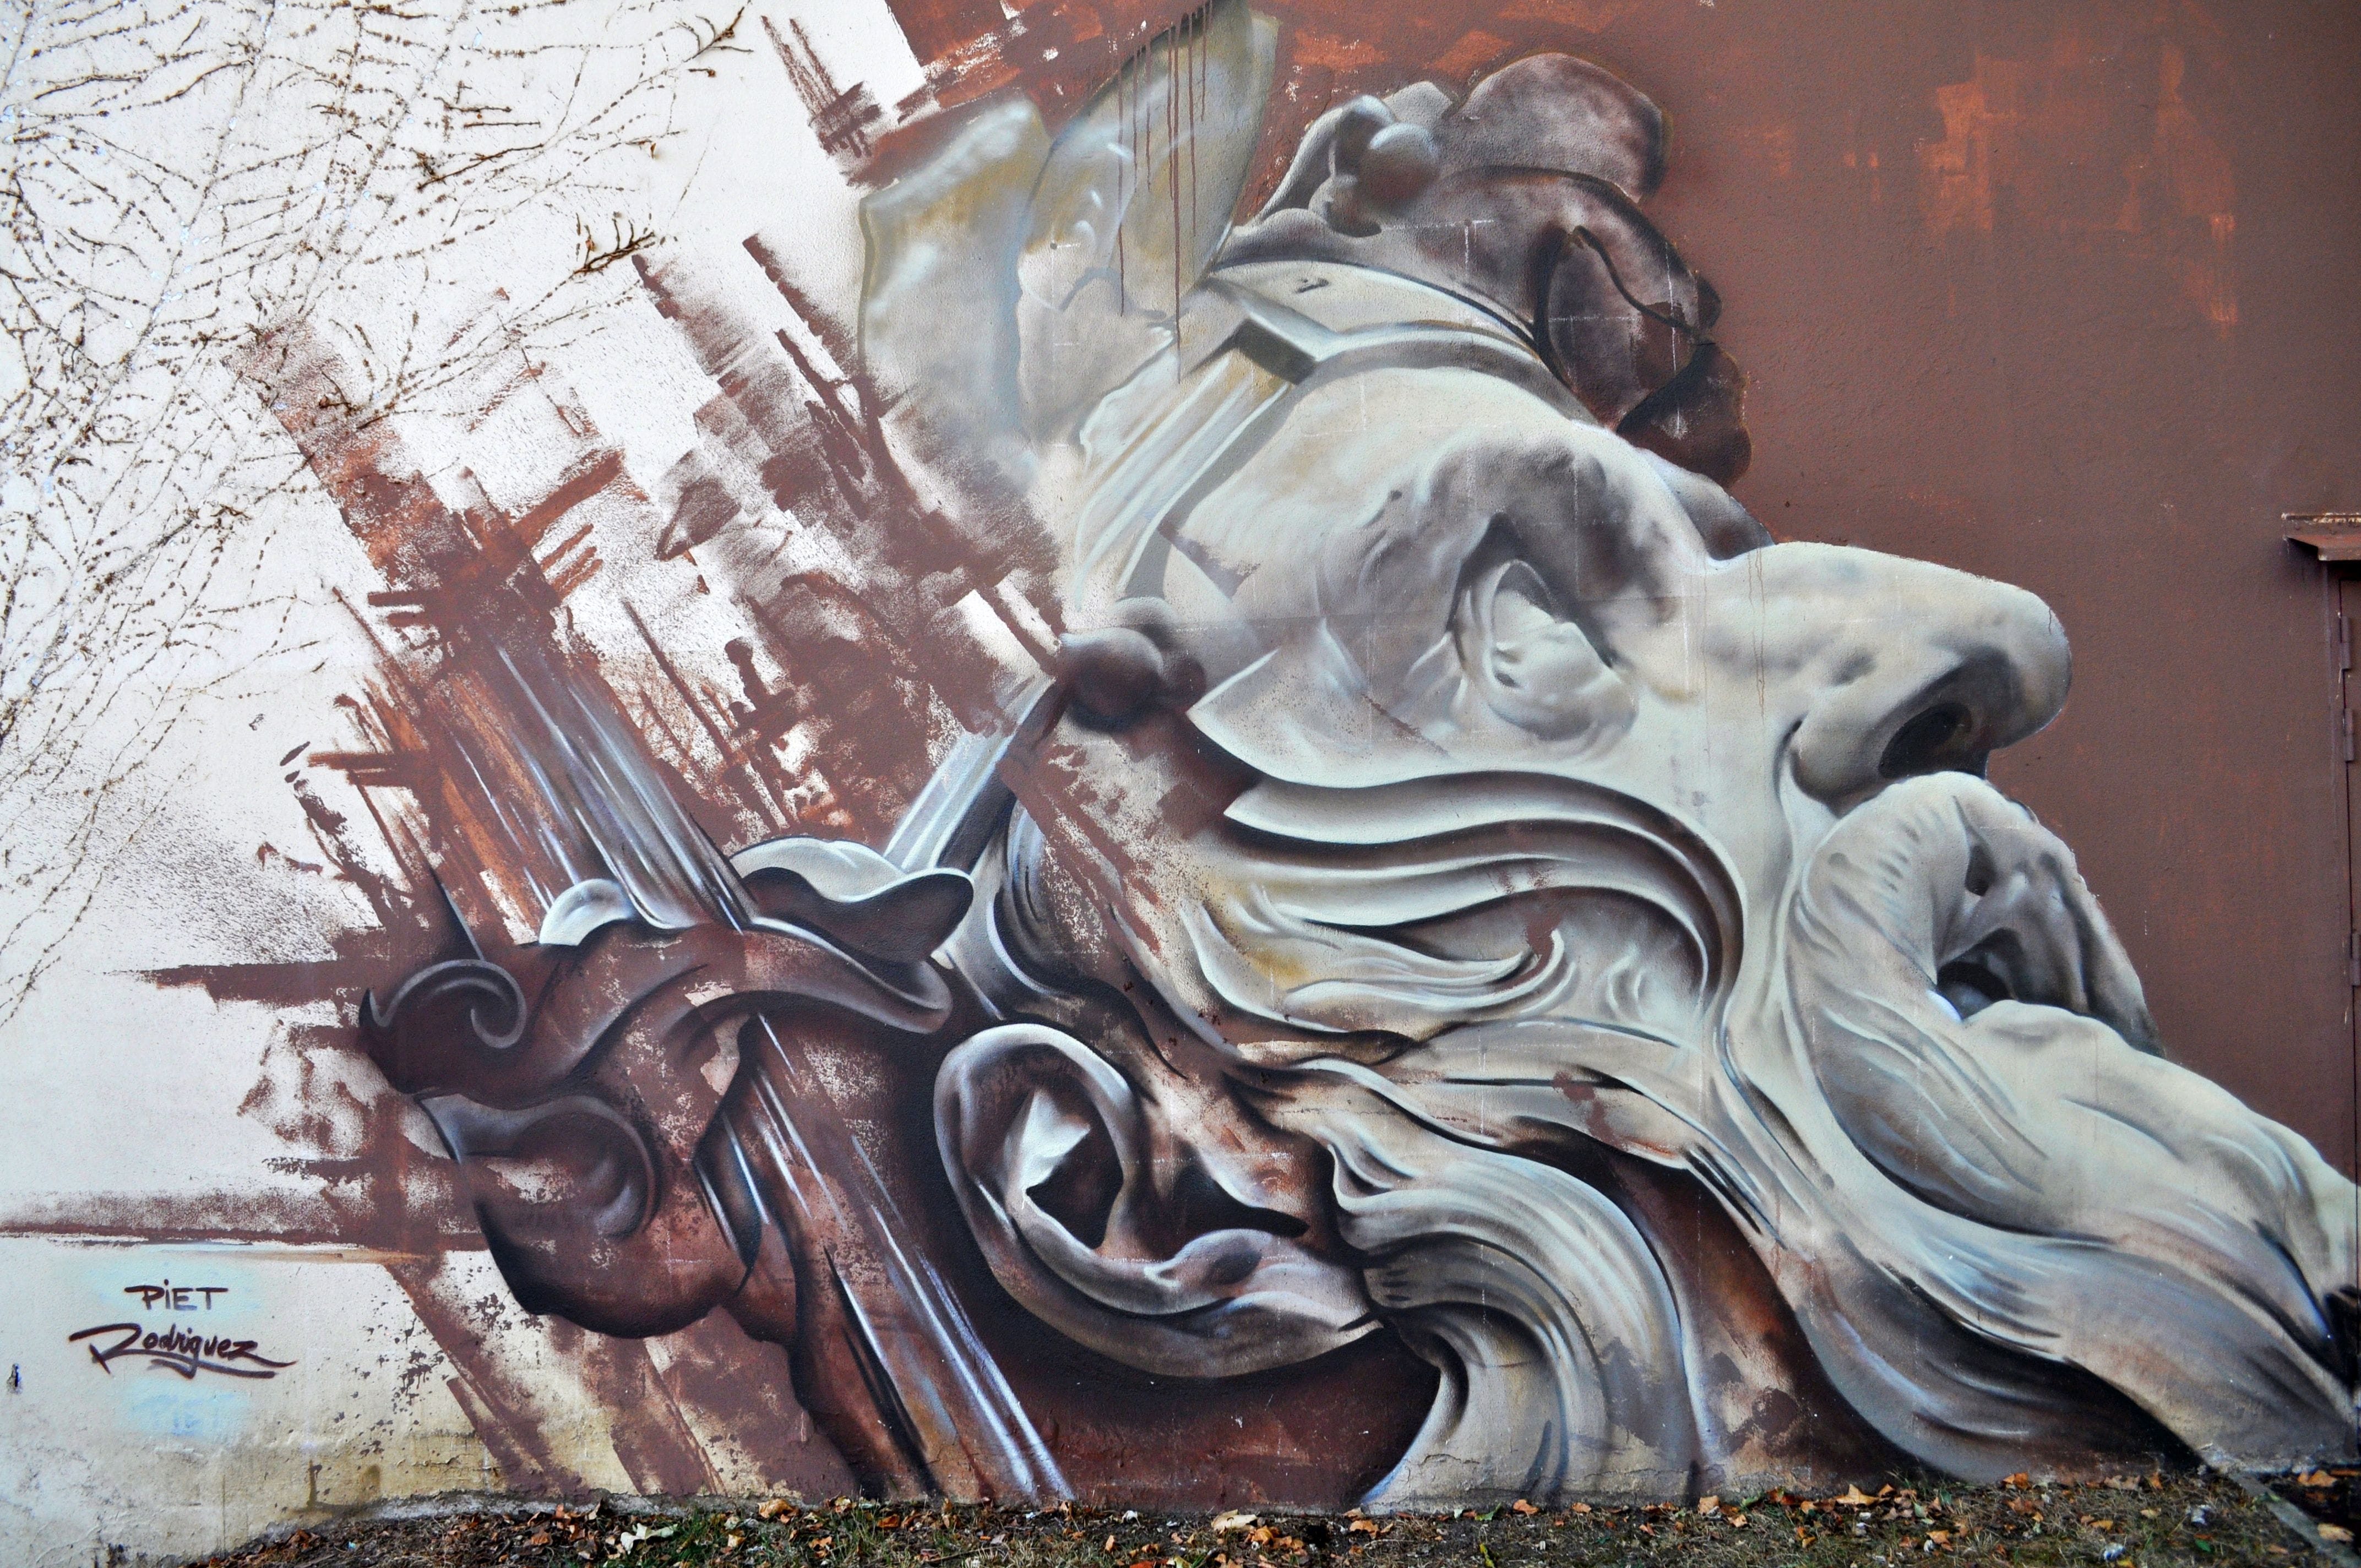 Graffiti 4510  by the artist Piet Rodriguez captured by elettrotajik in Cergy France